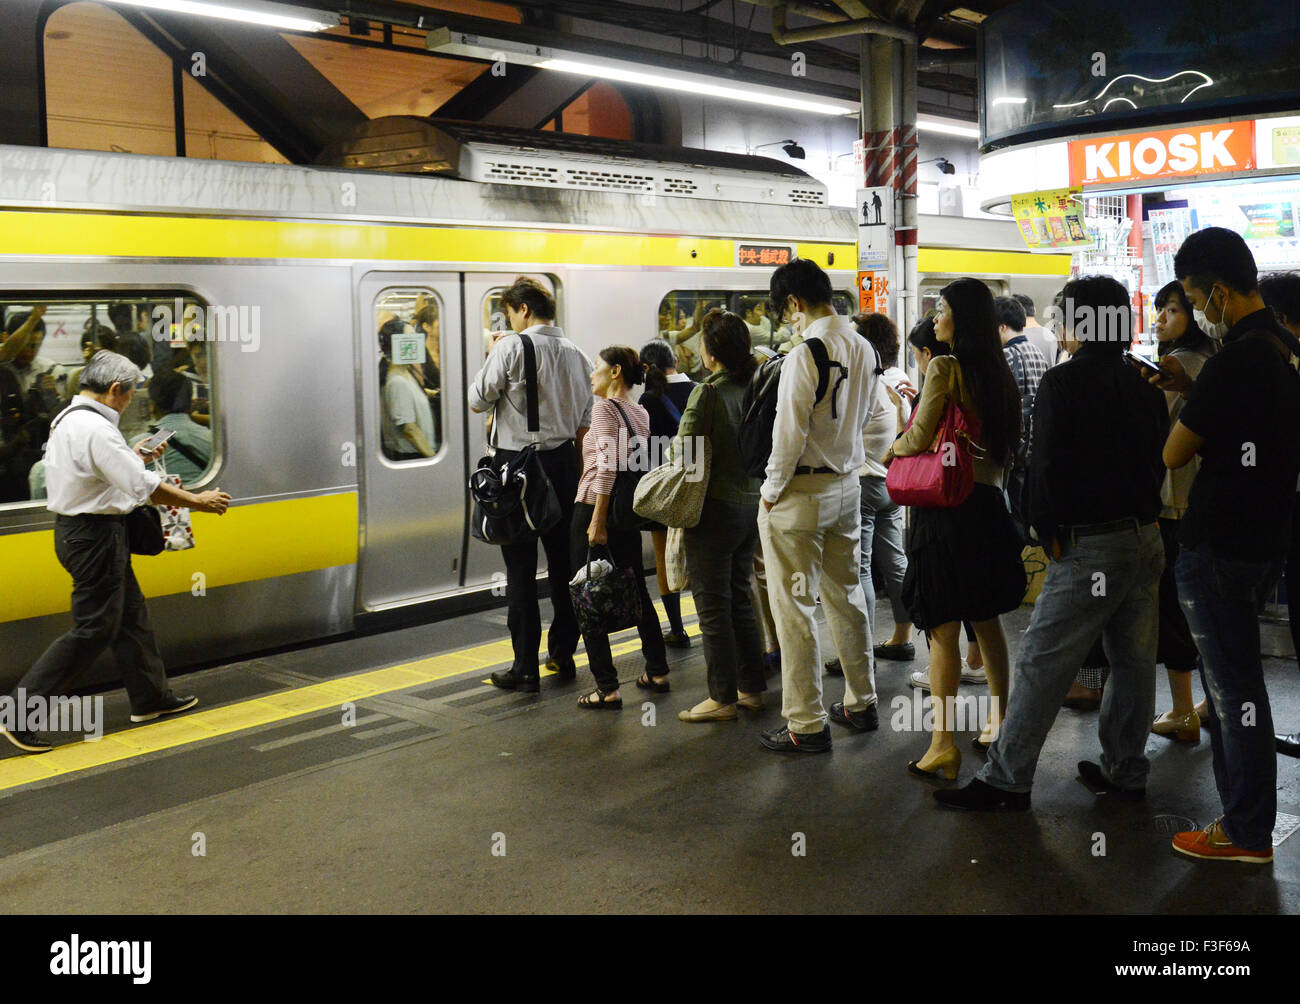 A busy platform during the evening rush hours in Shinjuku station, Tokyo. Stock Photo